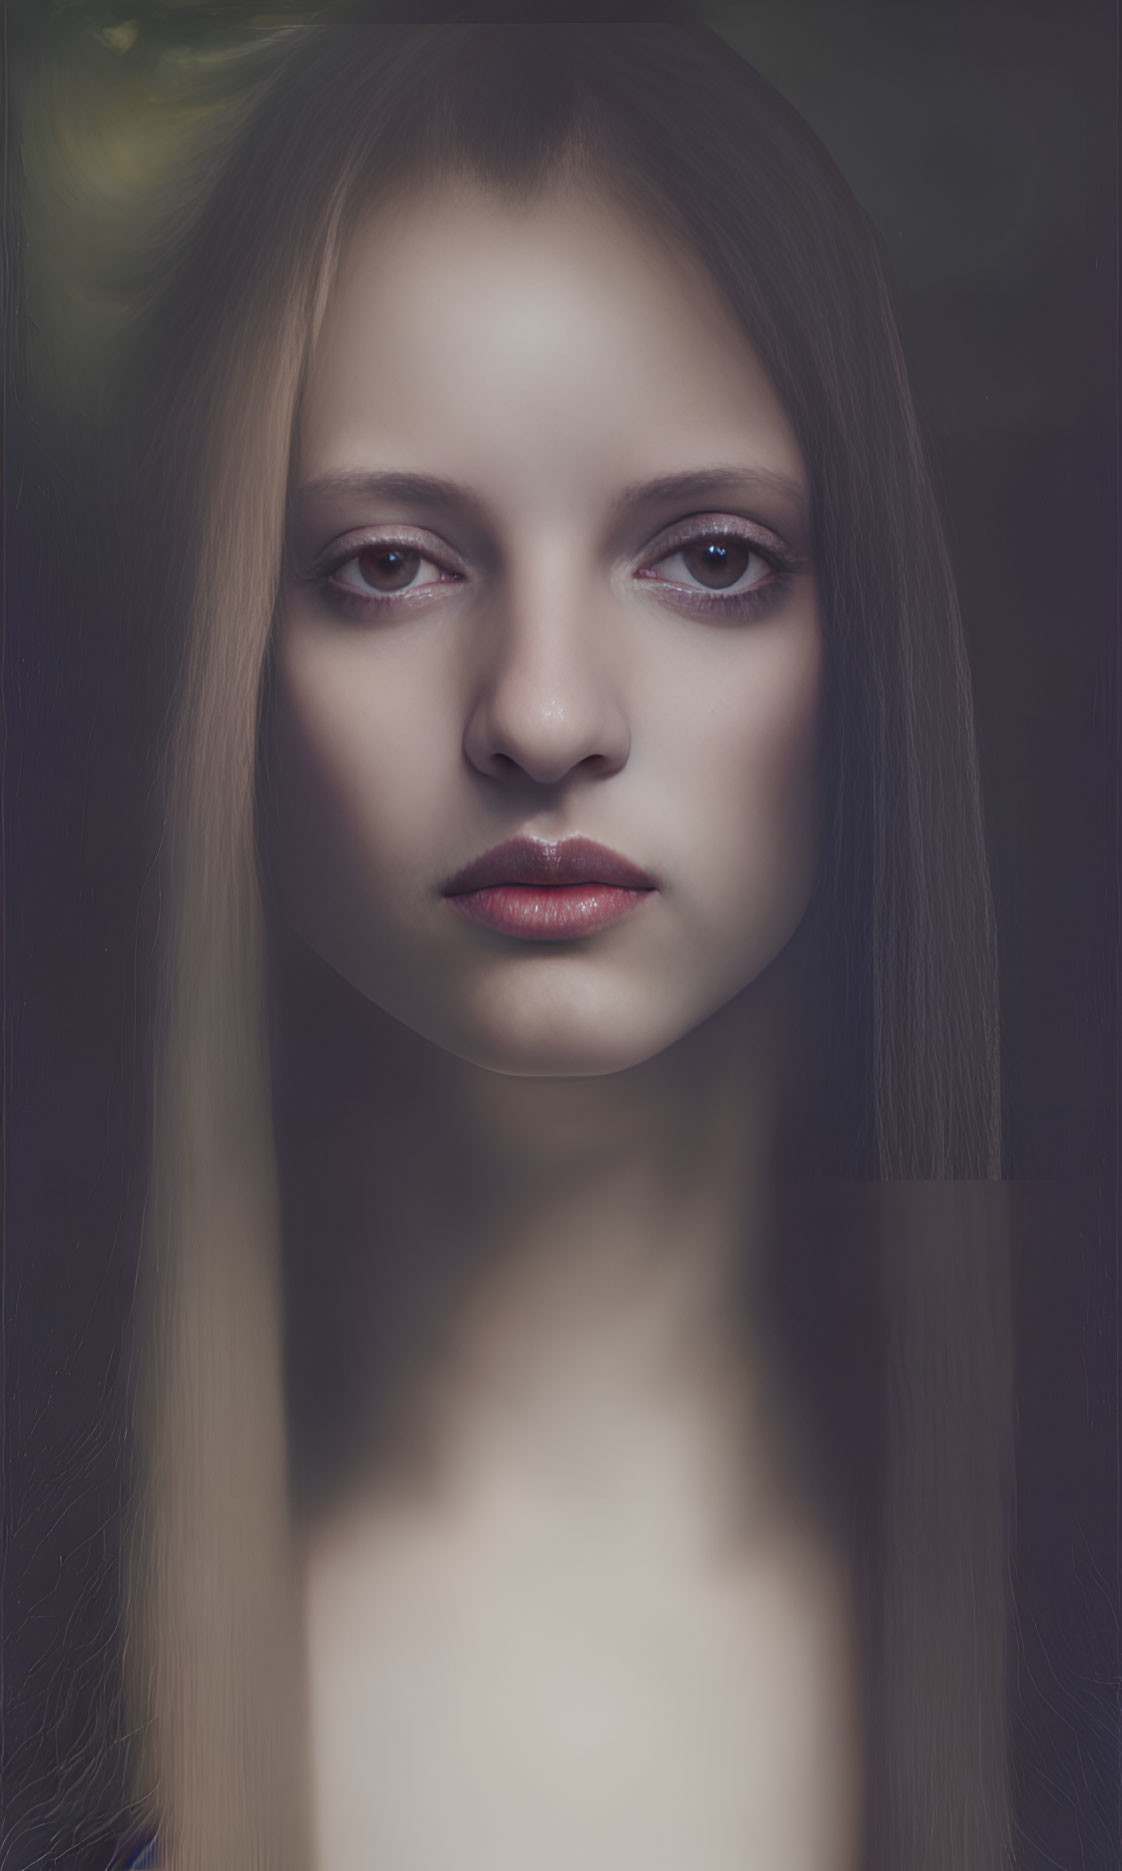 Portrait of Woman with Long Straight Hair and Dark Eyes on Dark Background